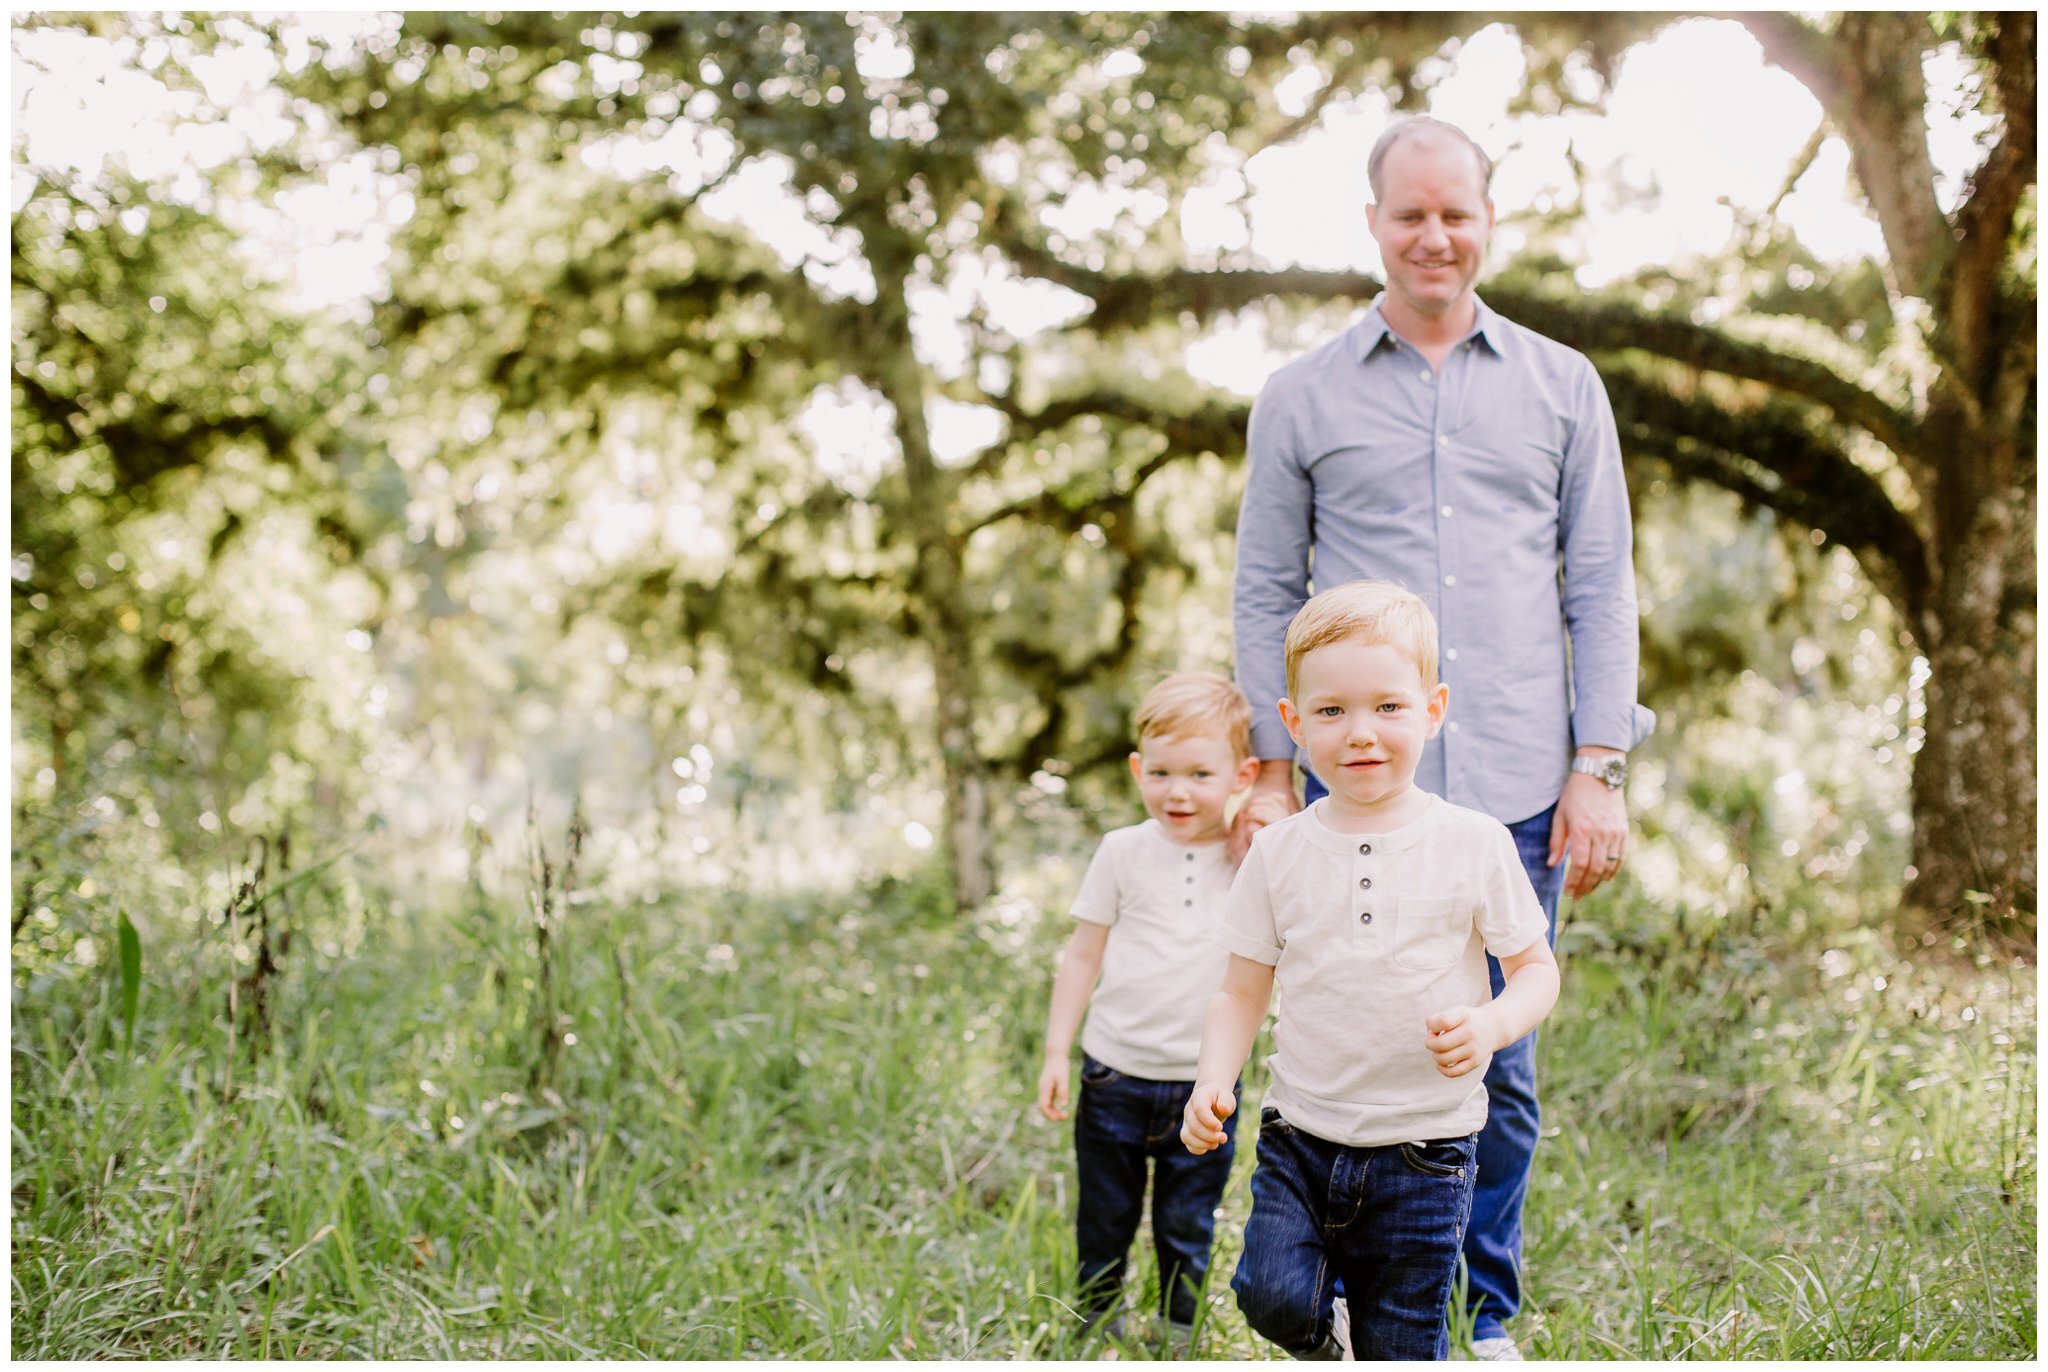 kimberly smith photography- south florida family photographers- south florida family photographer- family nature photo session- river bend park family photos | jupiter fl family photographers_0215.jpg